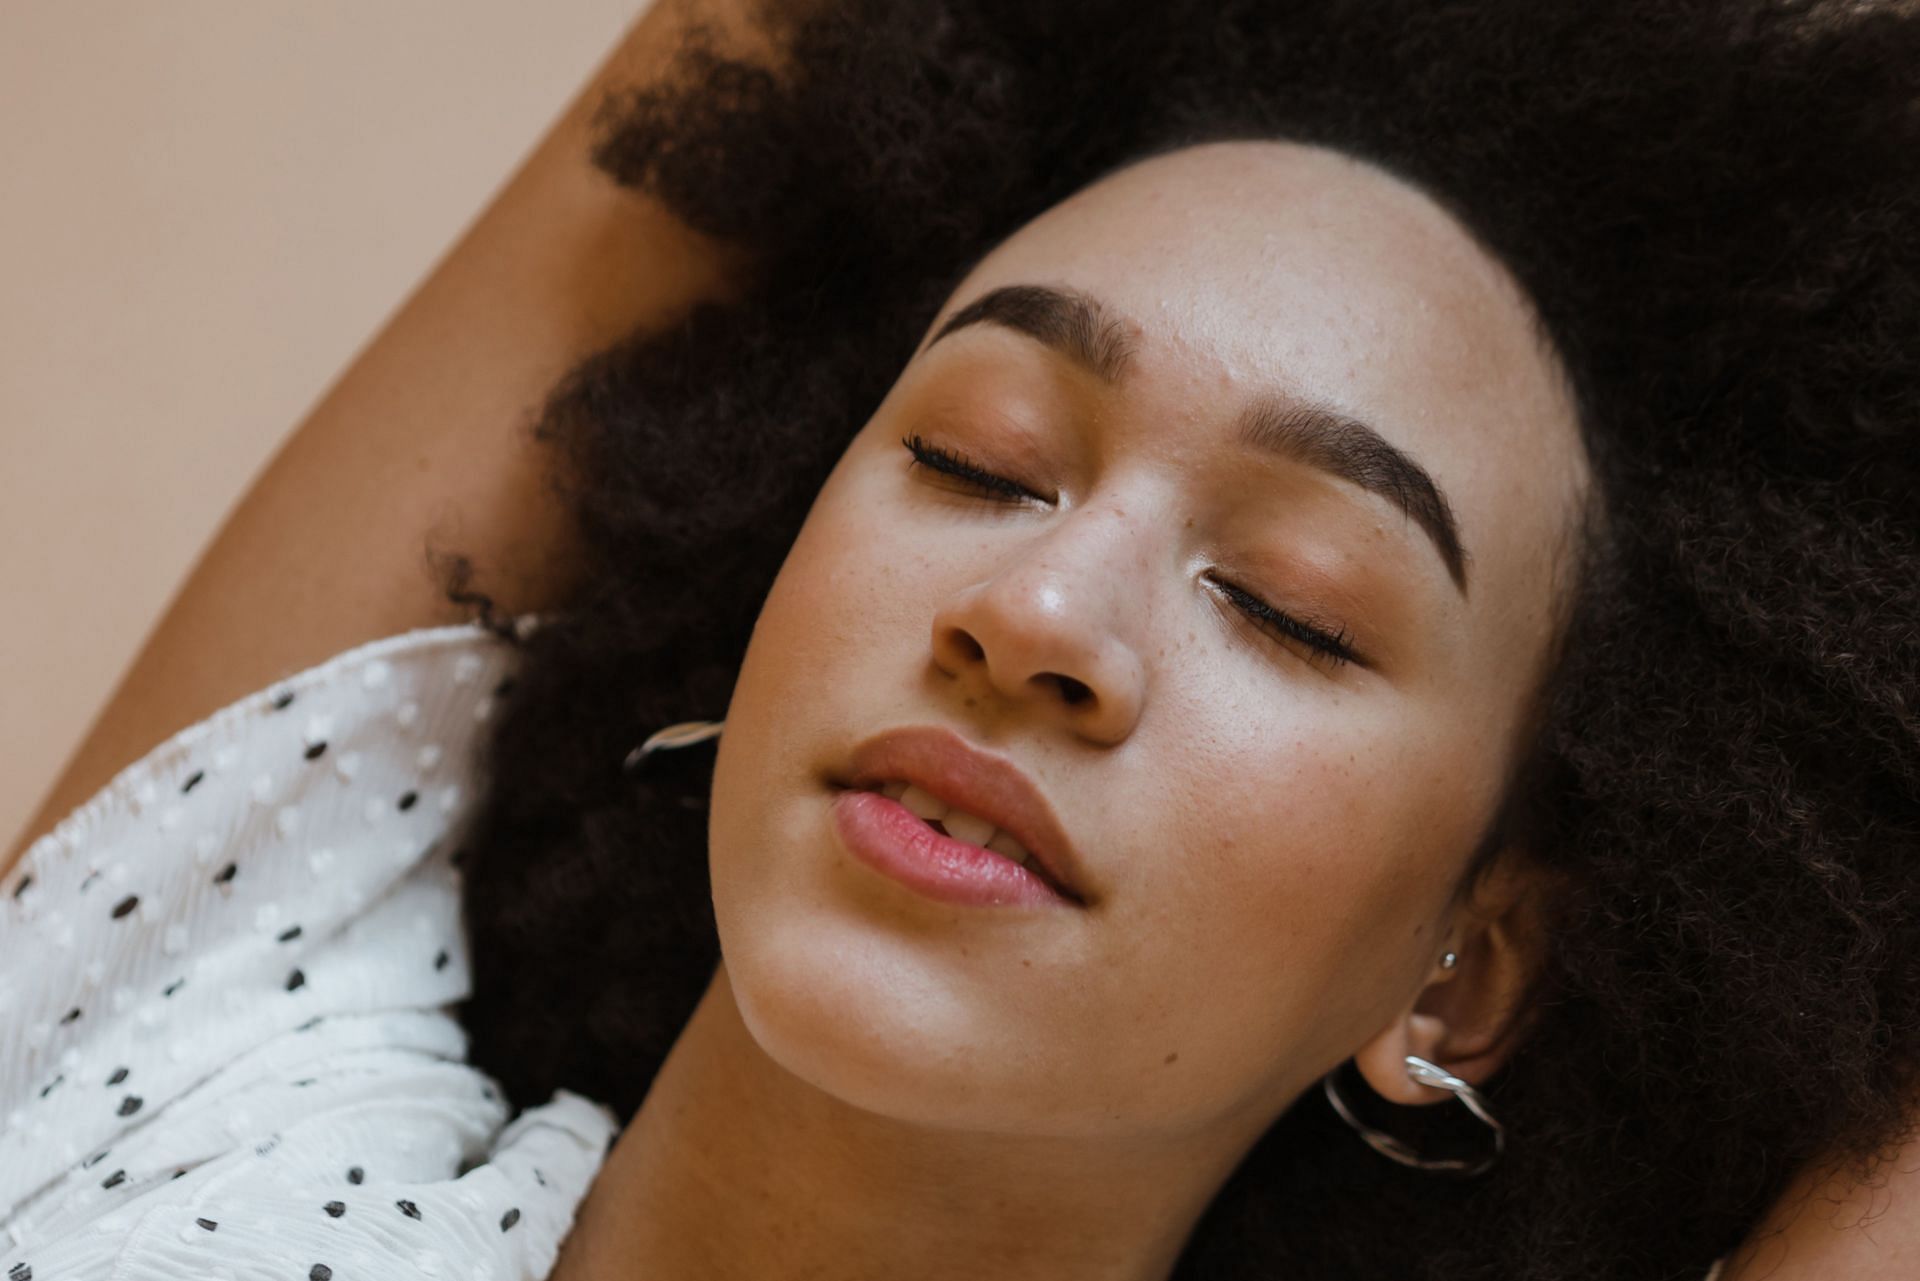 If you are not ready for therapy, you can take mini steps to fight off nocturnal panic attacks. (Image via Pexels/ Polina Kovaleva)